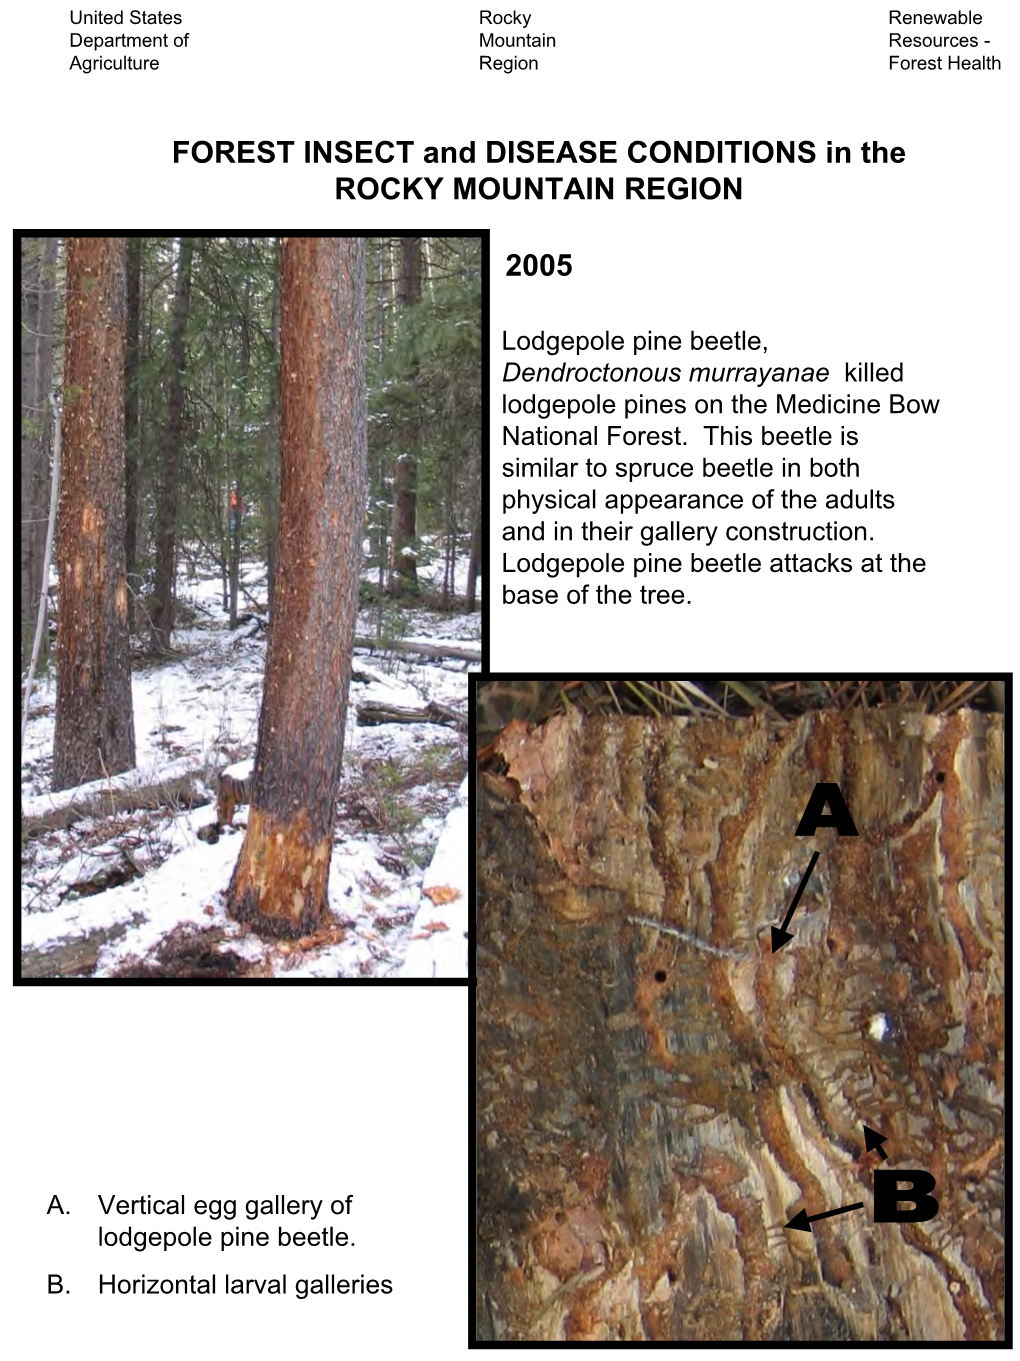 FOREST INSECT and DISEASE CONDITIONS in the ROCKY MOUNTAIN REGION